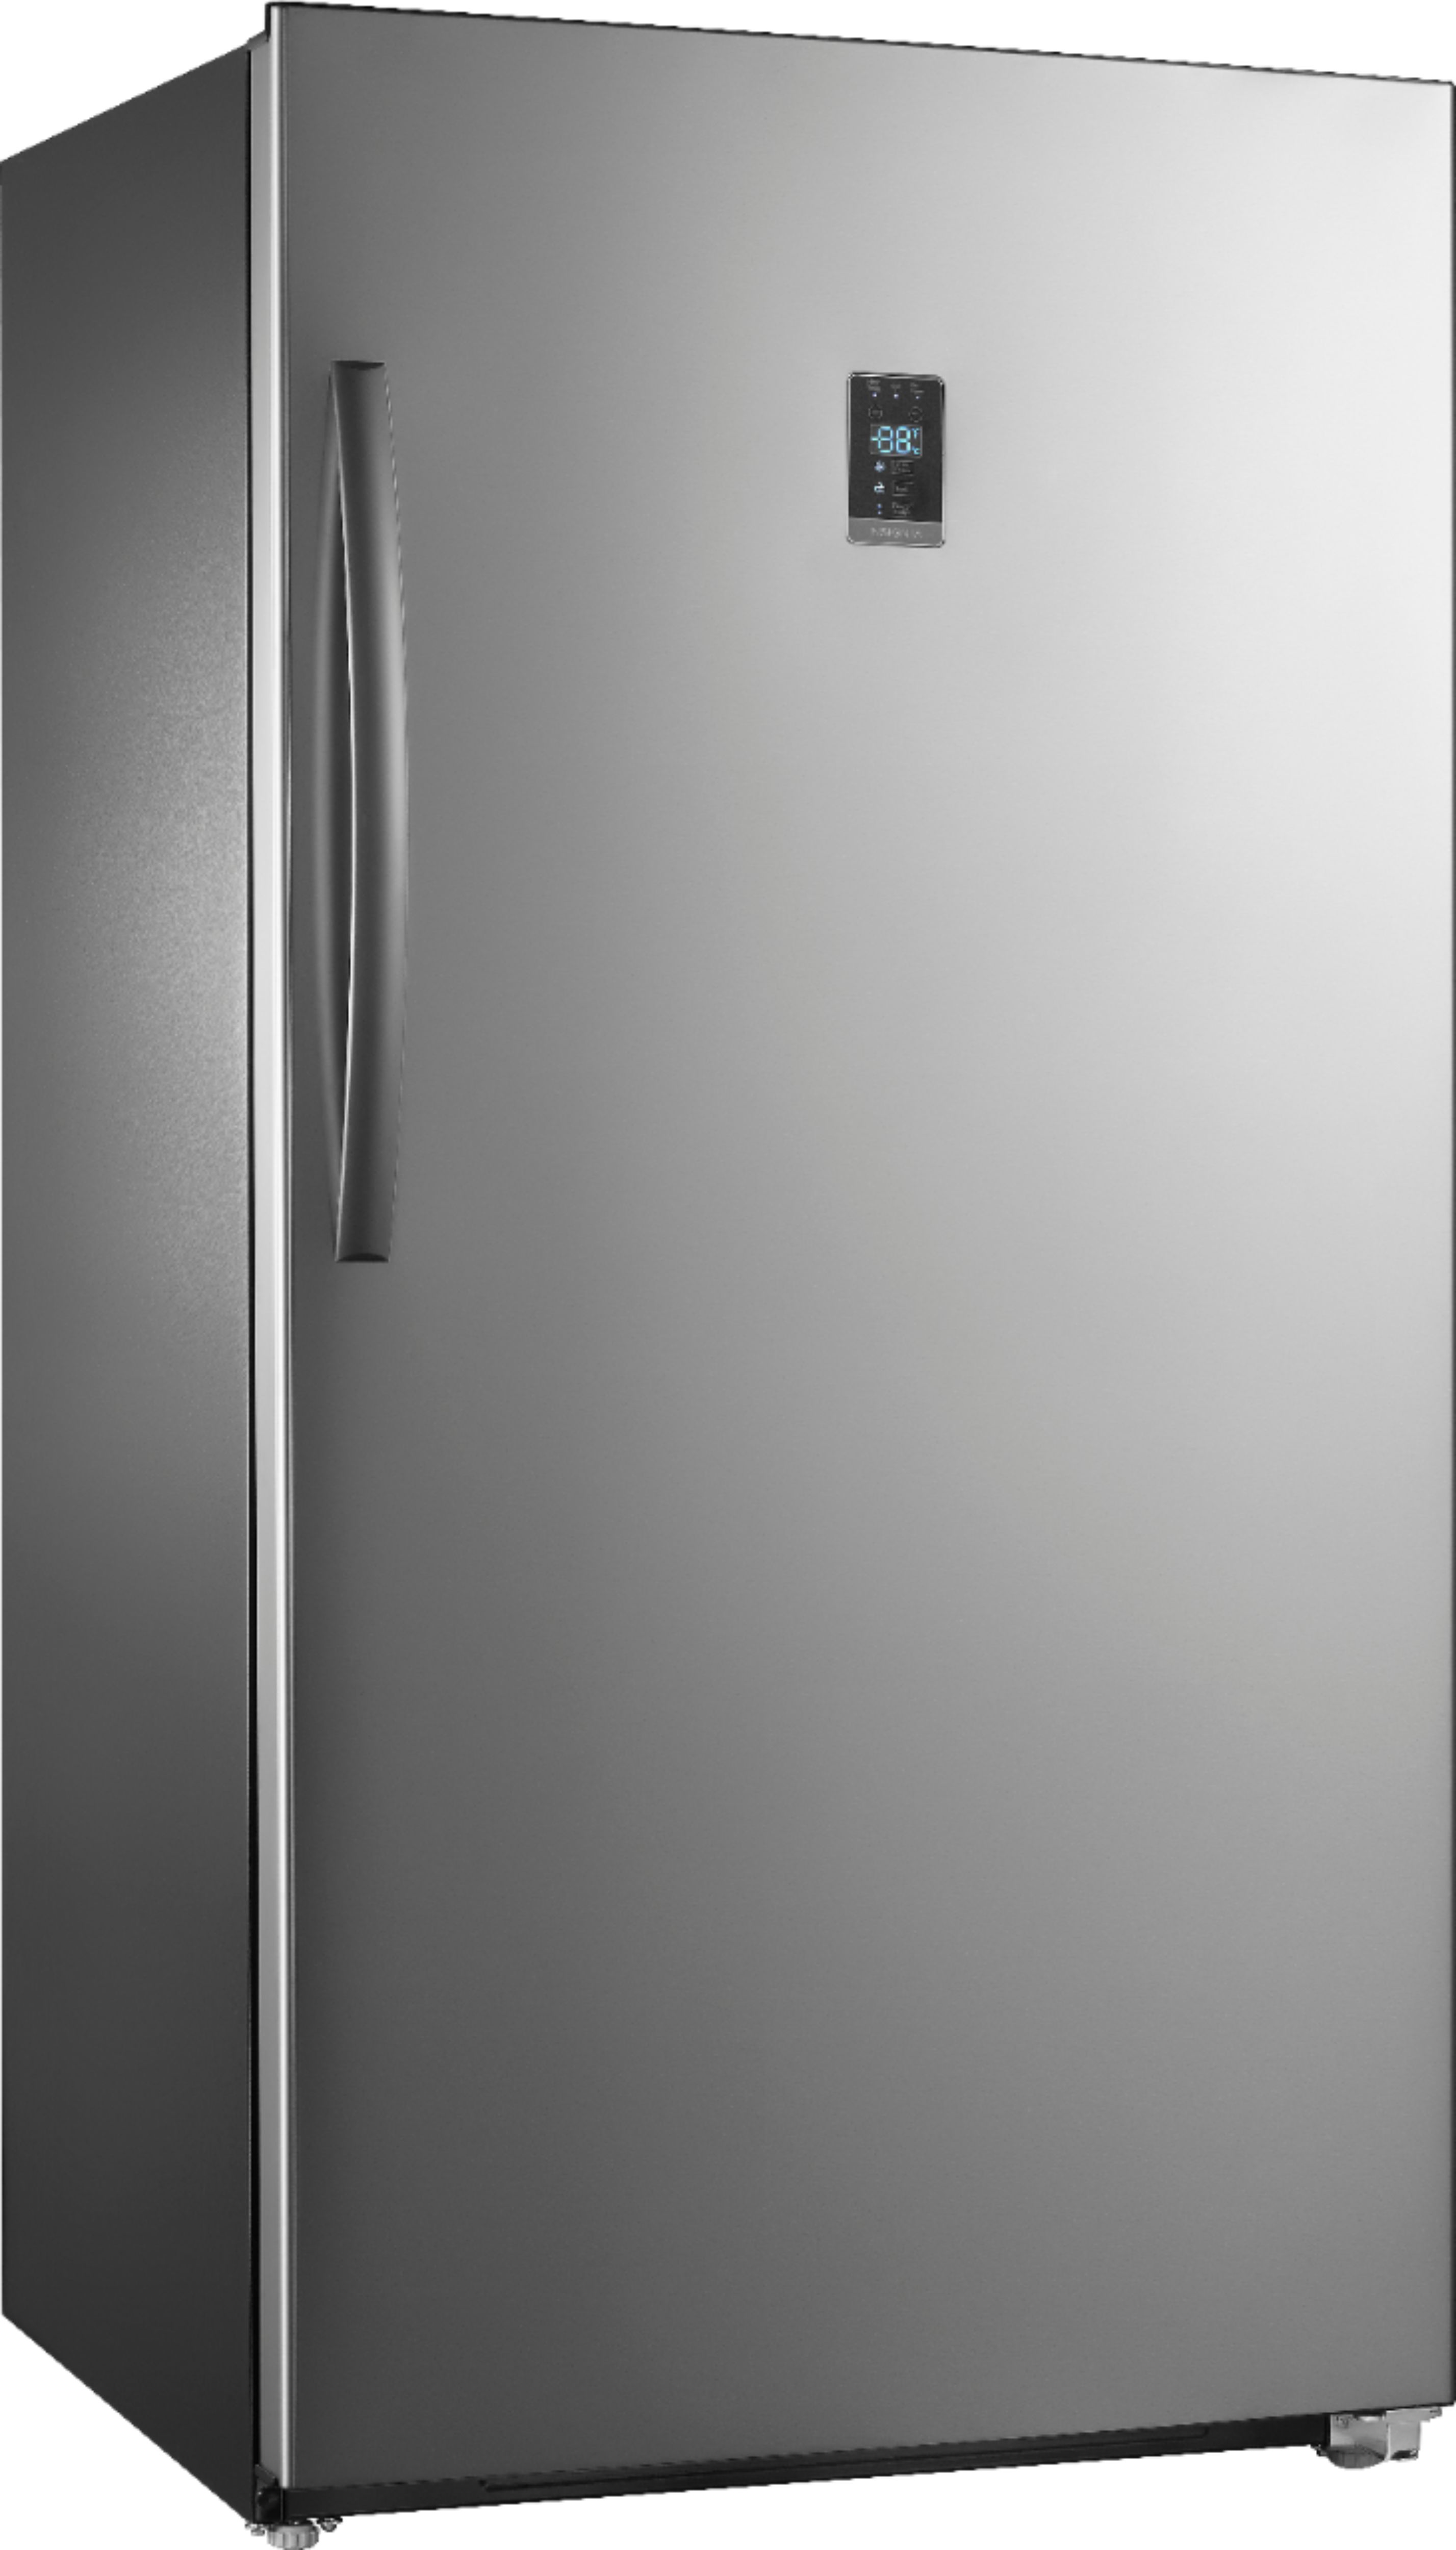 Angle View: Insignia™ - 17.0 Cu. Ft. Frost-Free Upright Convertible Freezer/Refrigerator - Stainless steel